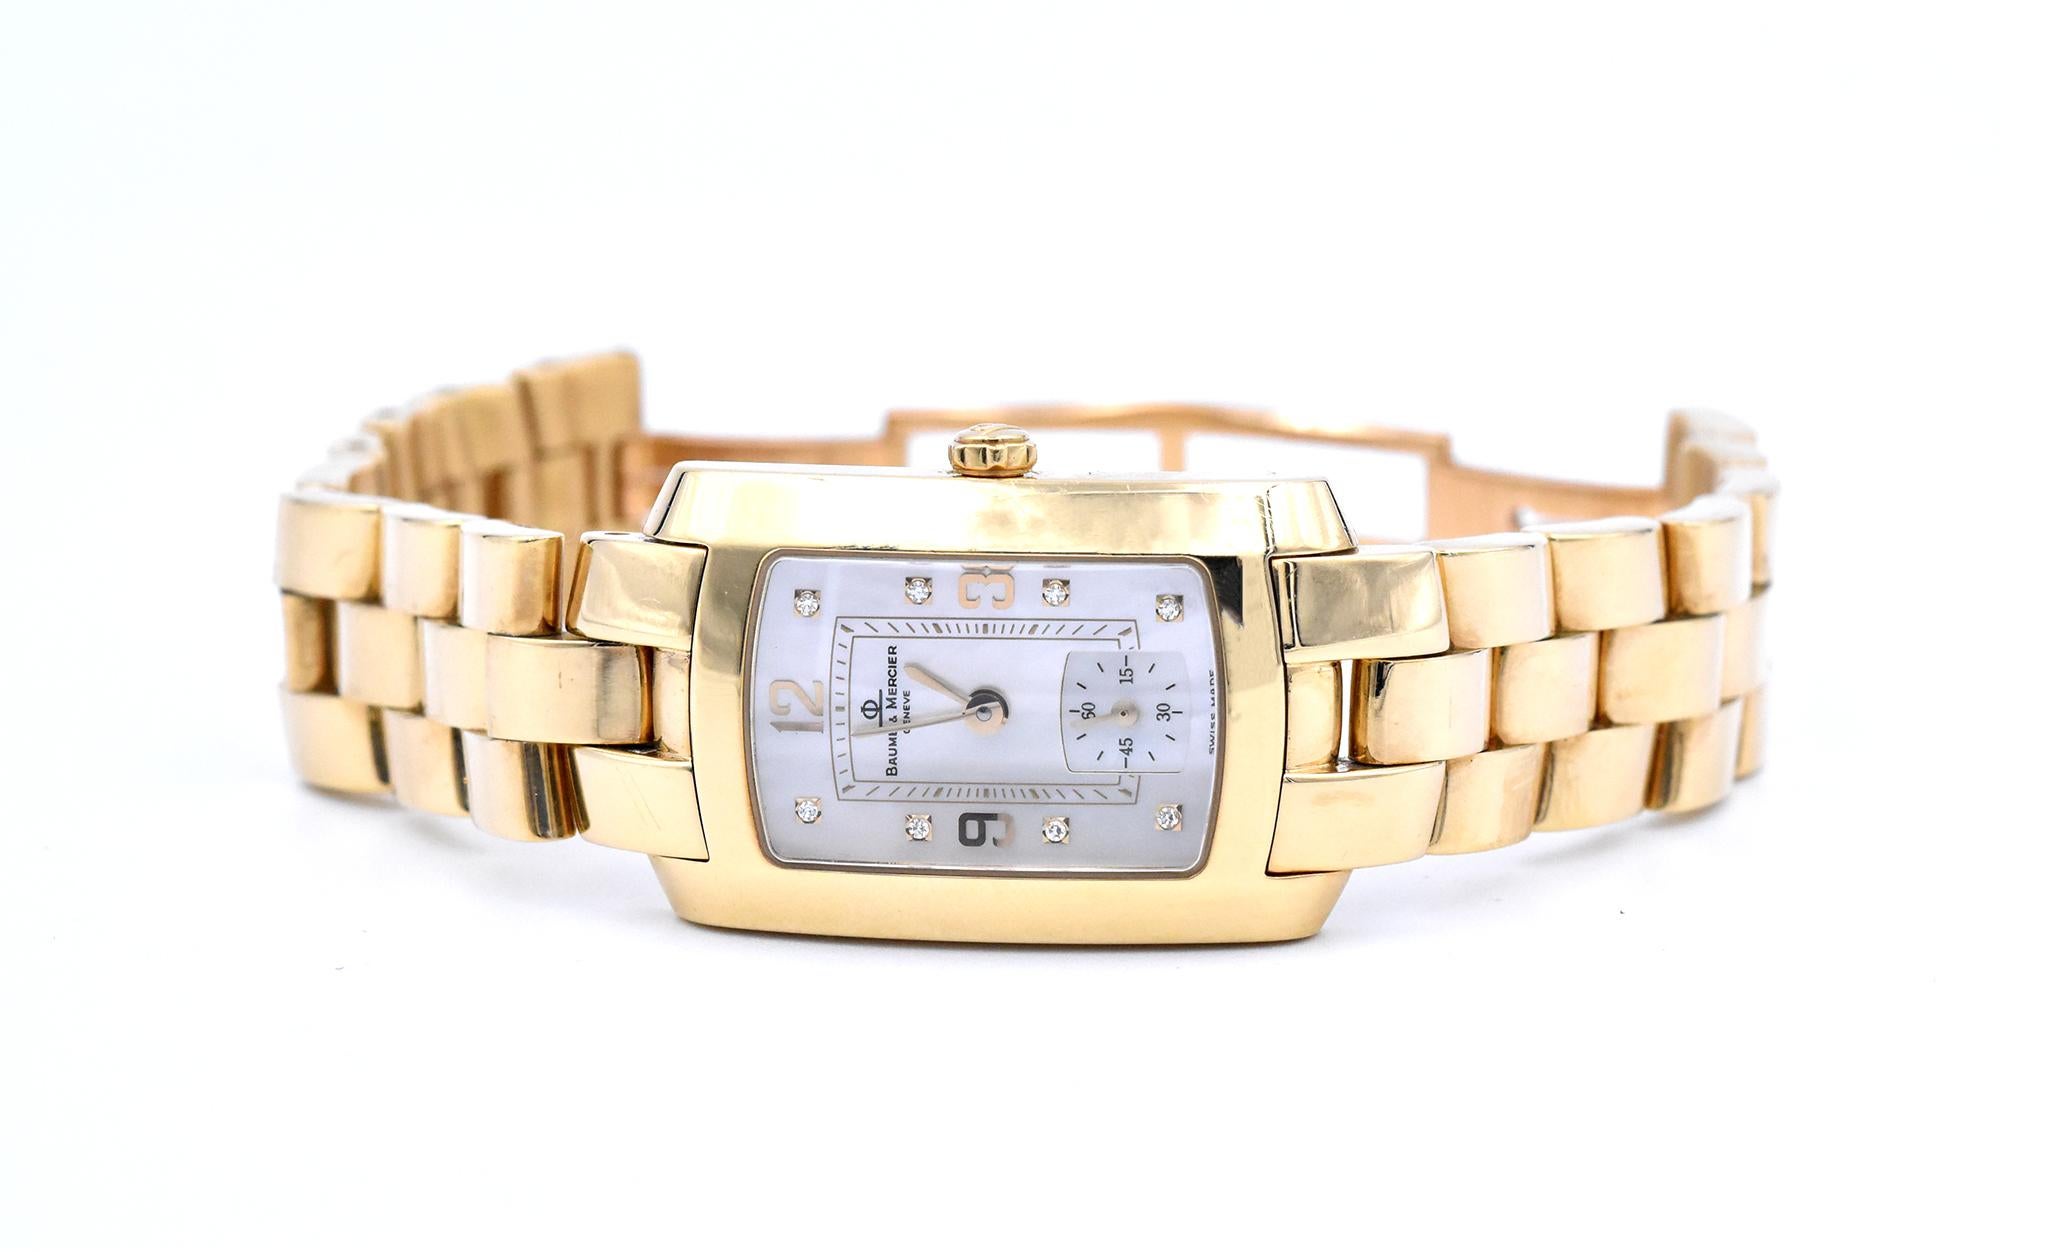 Movement: quartz
Function: hours, minutes
Case: 22mm x 33mm 18k yellow gold case, sapphire crystal, smooth bezel, pull/push crown
Band: 18k yellow gold bracelet with butterfly clasp
Dial: white mop diamond dial, eight diamond hour markers, gold